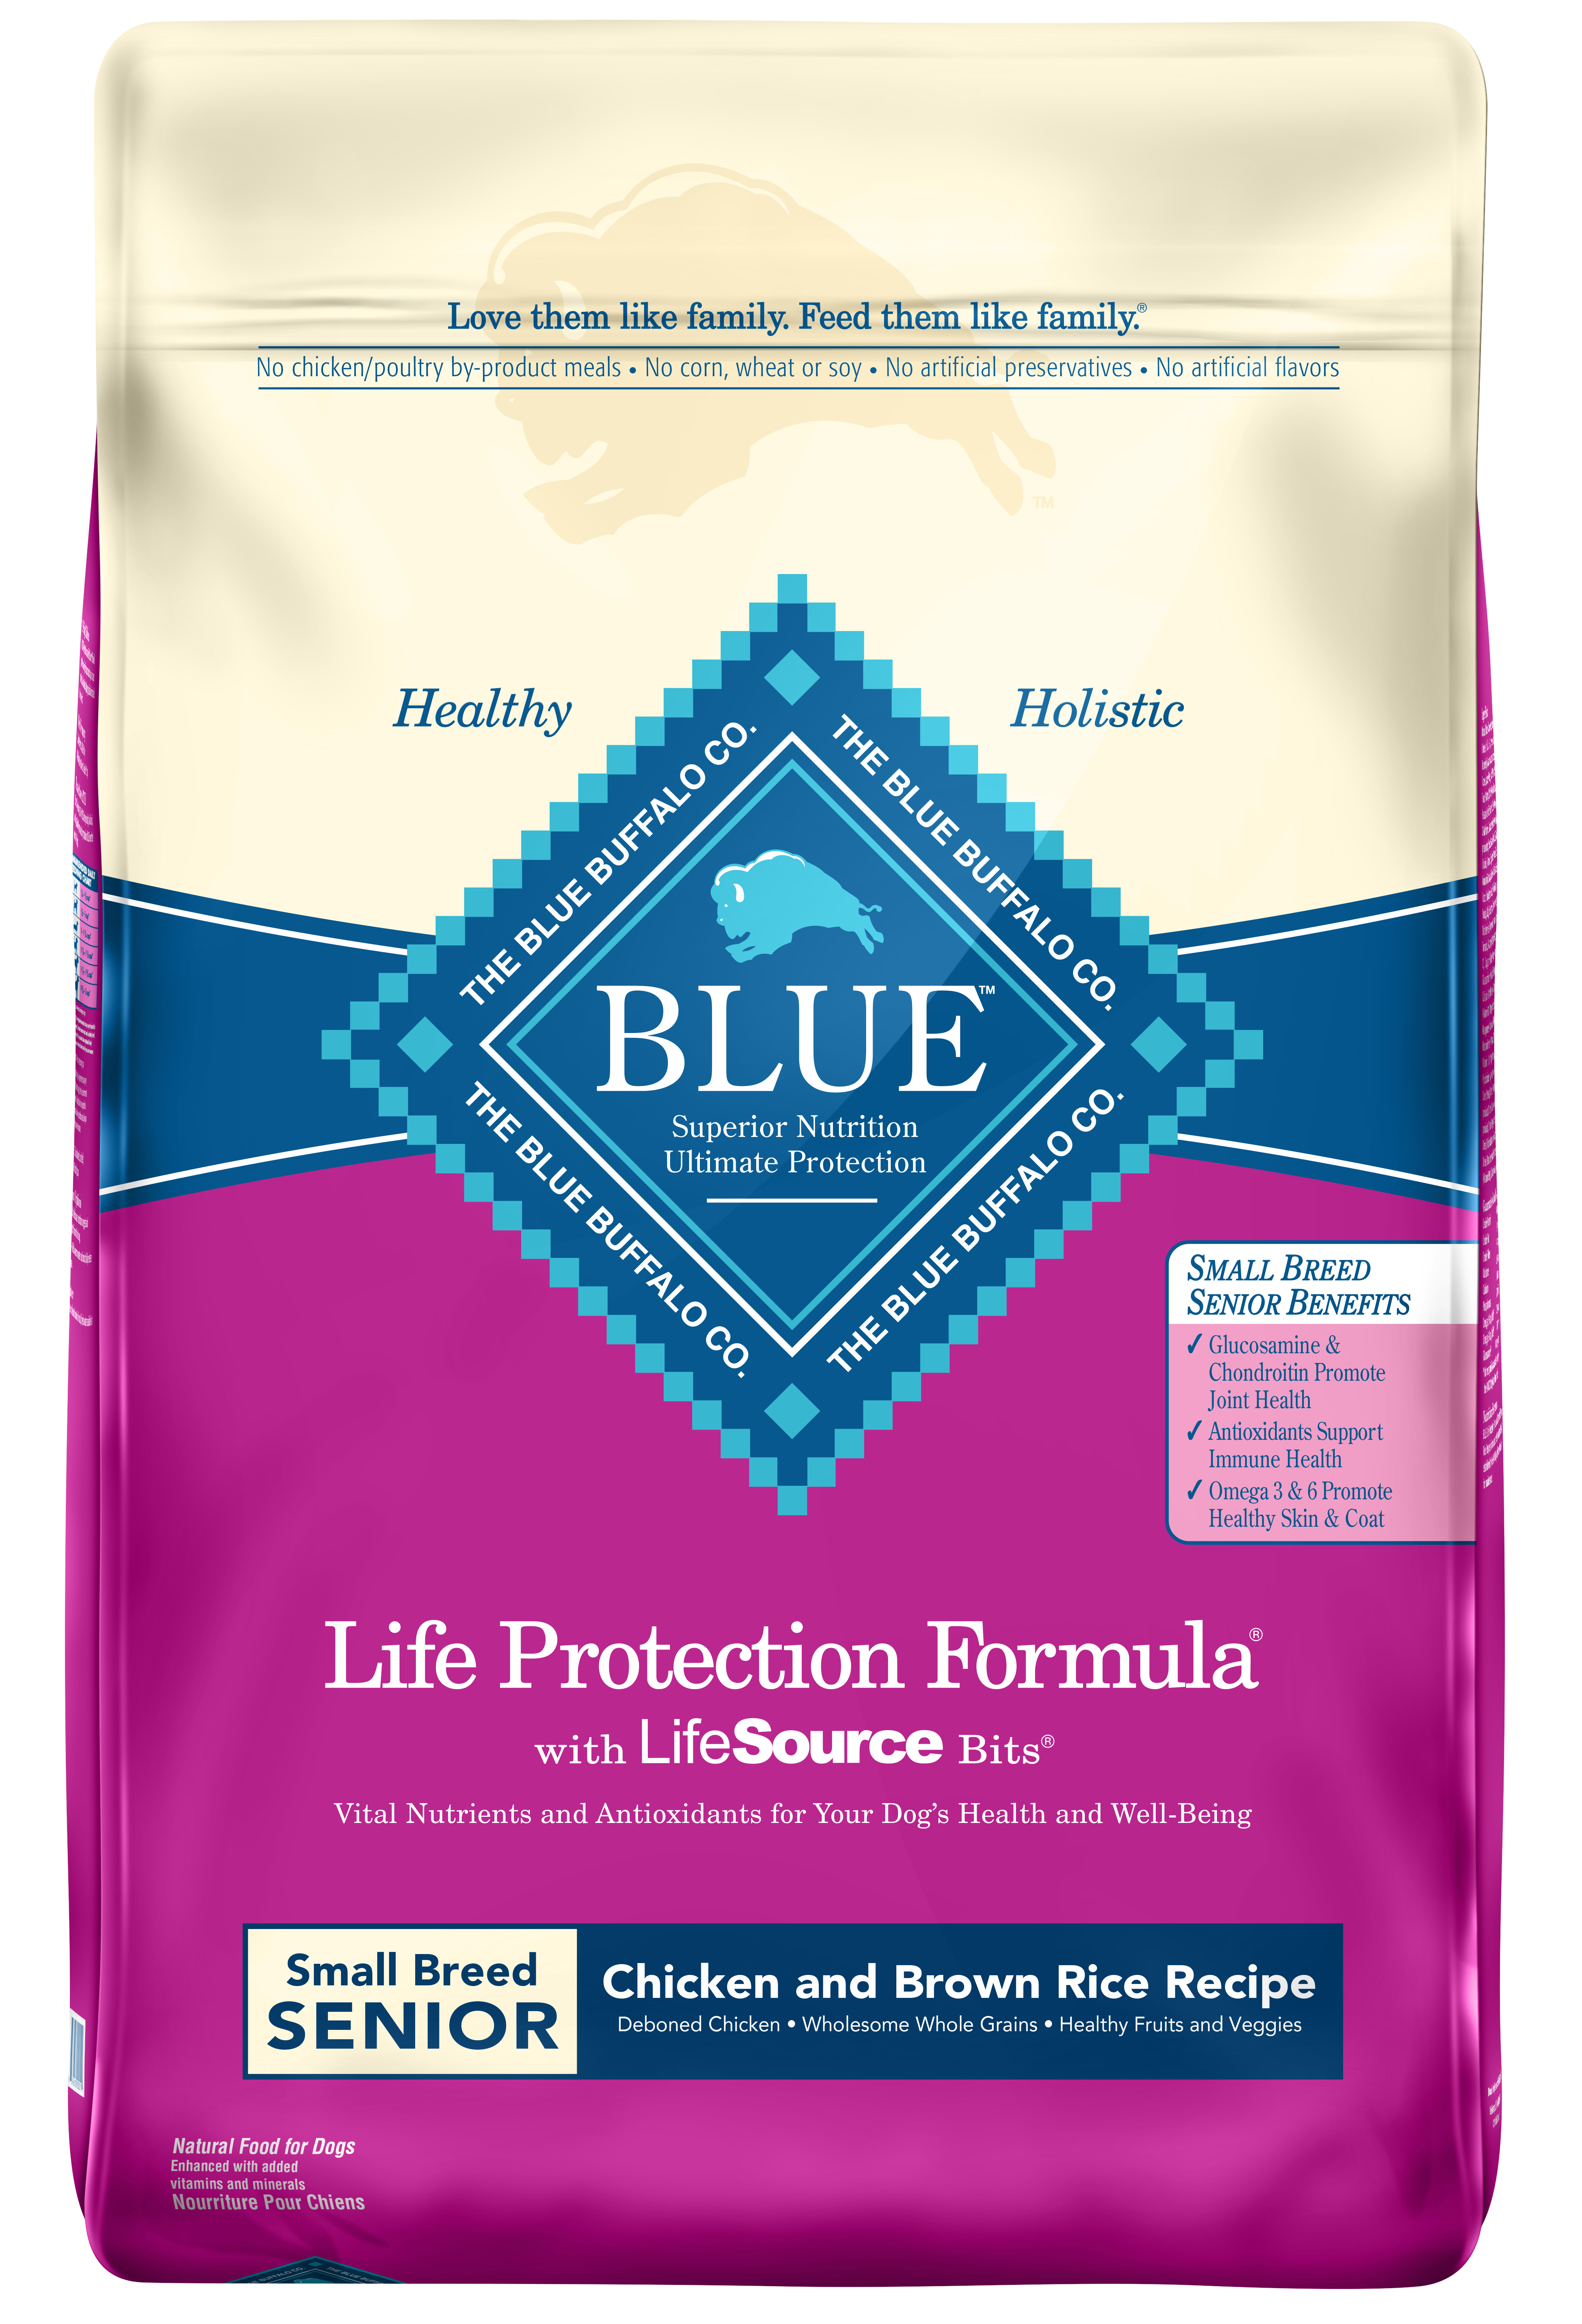 BLUE Life Protection Formula Chicken and Brown Rice Recipe for Small Breed Senior Dogs, 15 lb